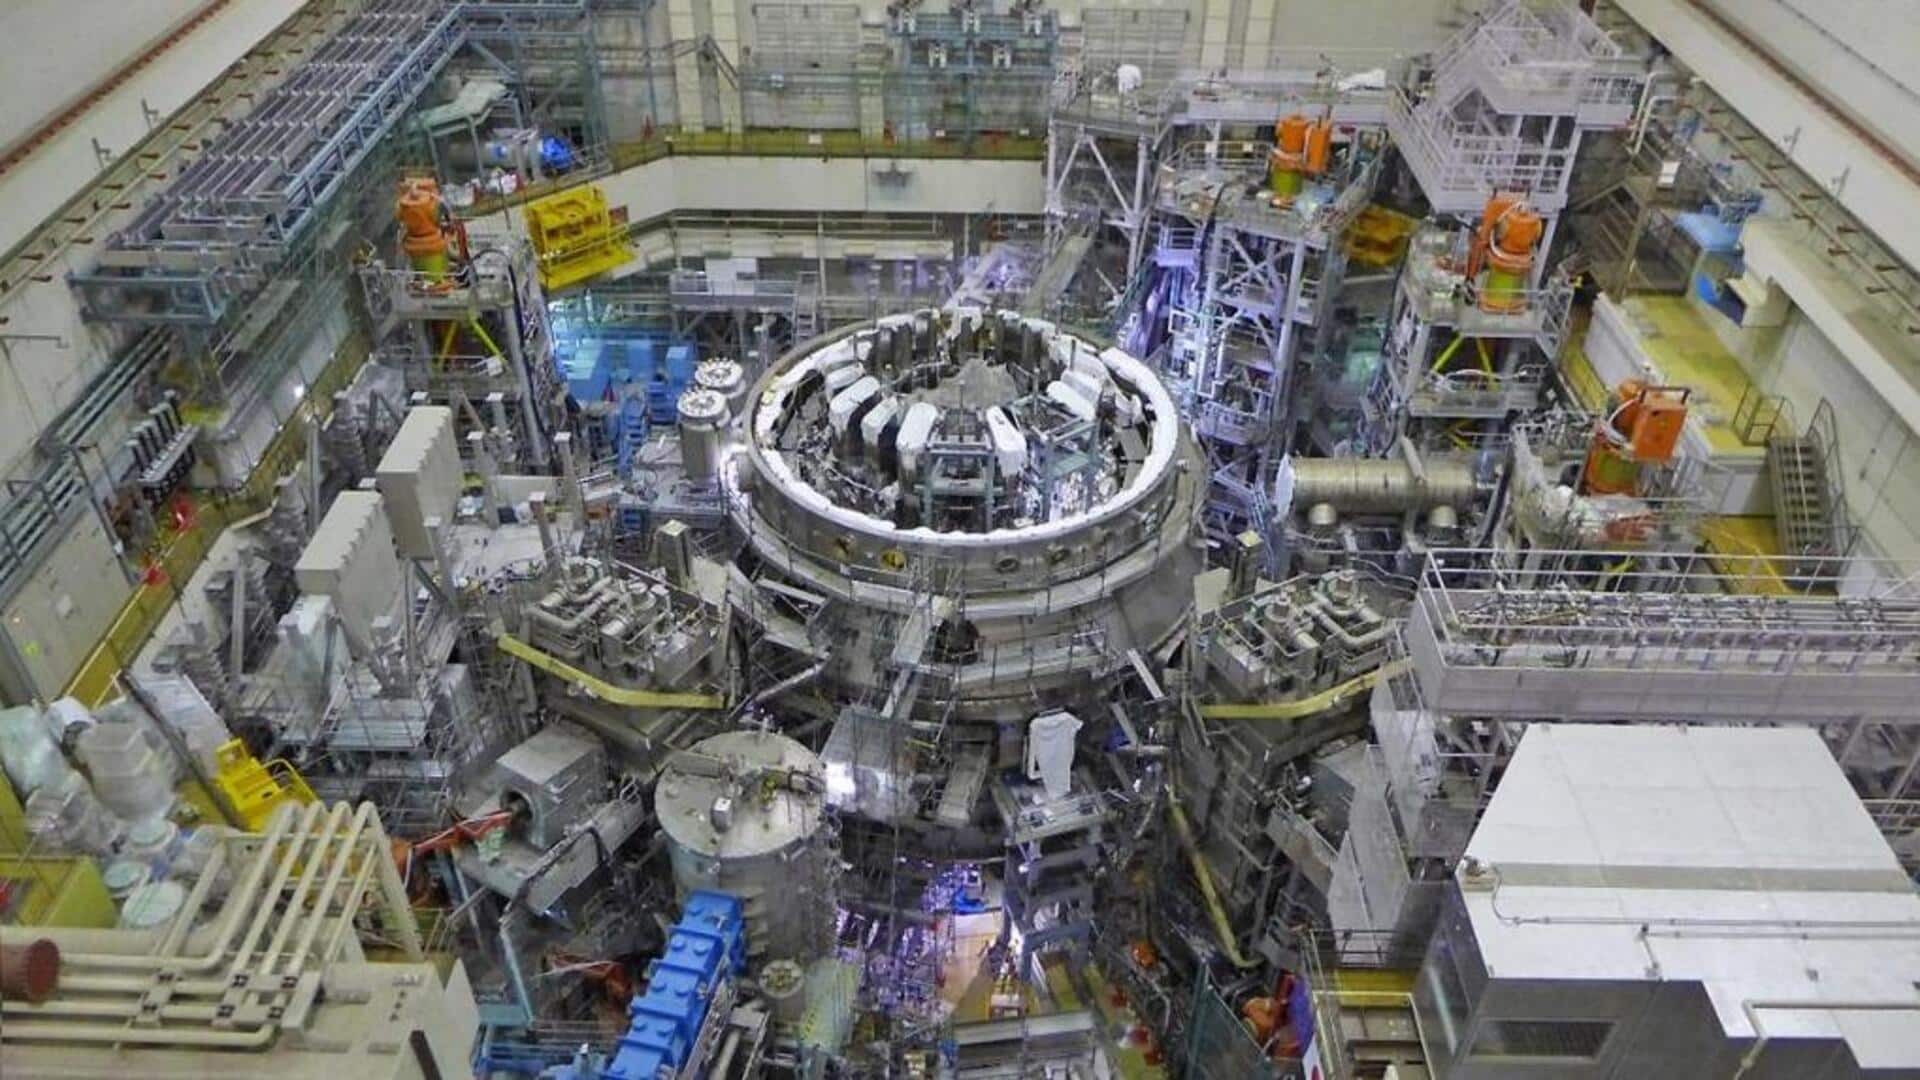 Top 5 facts about world's largest nuclear fusion reactor